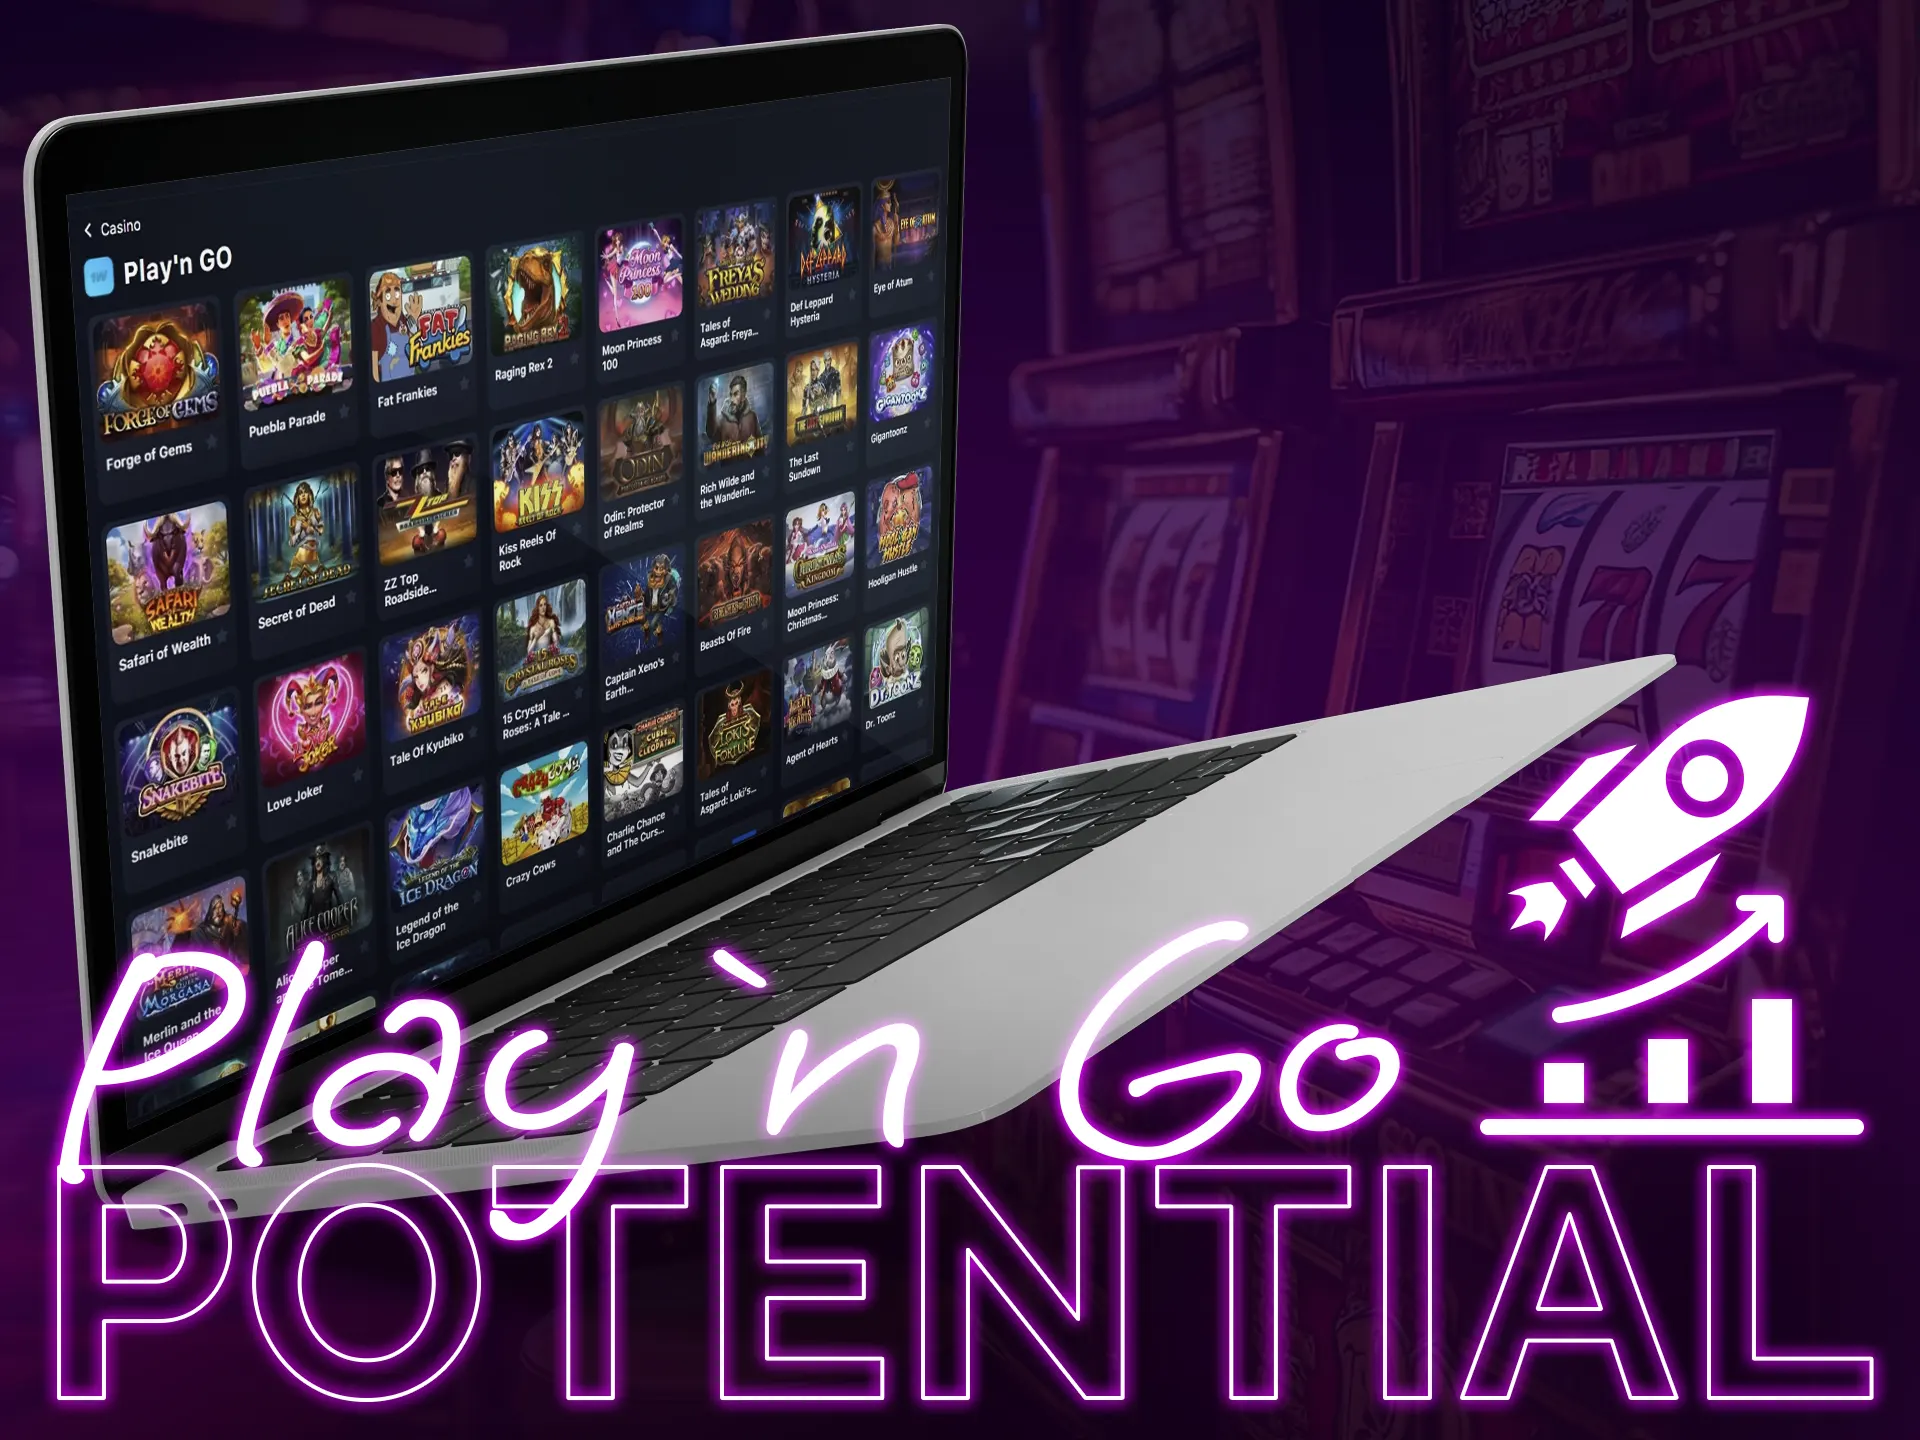 The games offered by Play'n Go have potential for a big winnings.